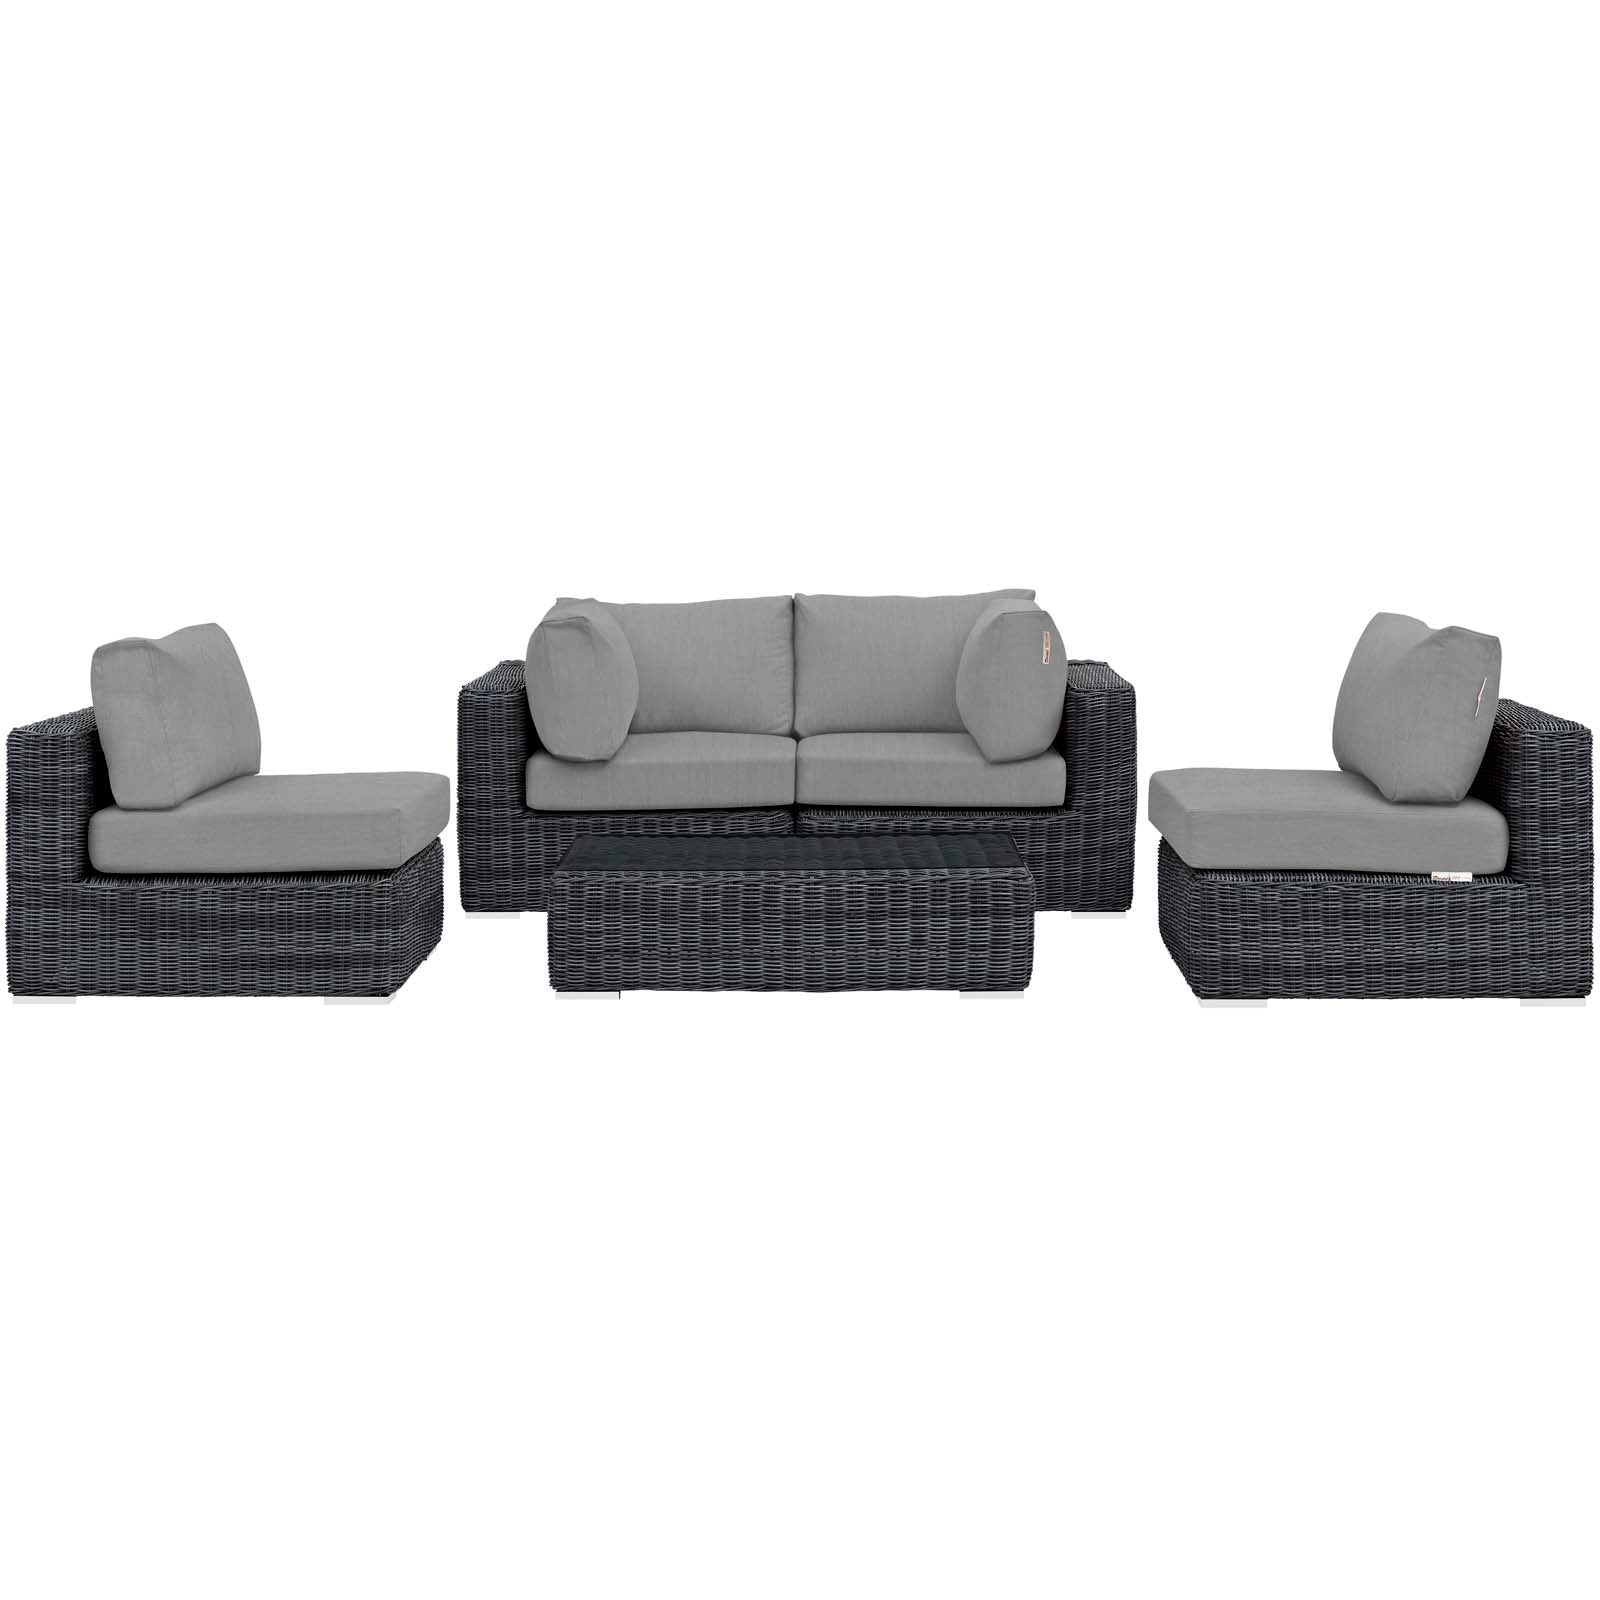 Summon 5 Piece Outdoor Patio Sunbrella® Sectional Set-Outdoor Sectional-Modway-Wall2Wall Furnishings